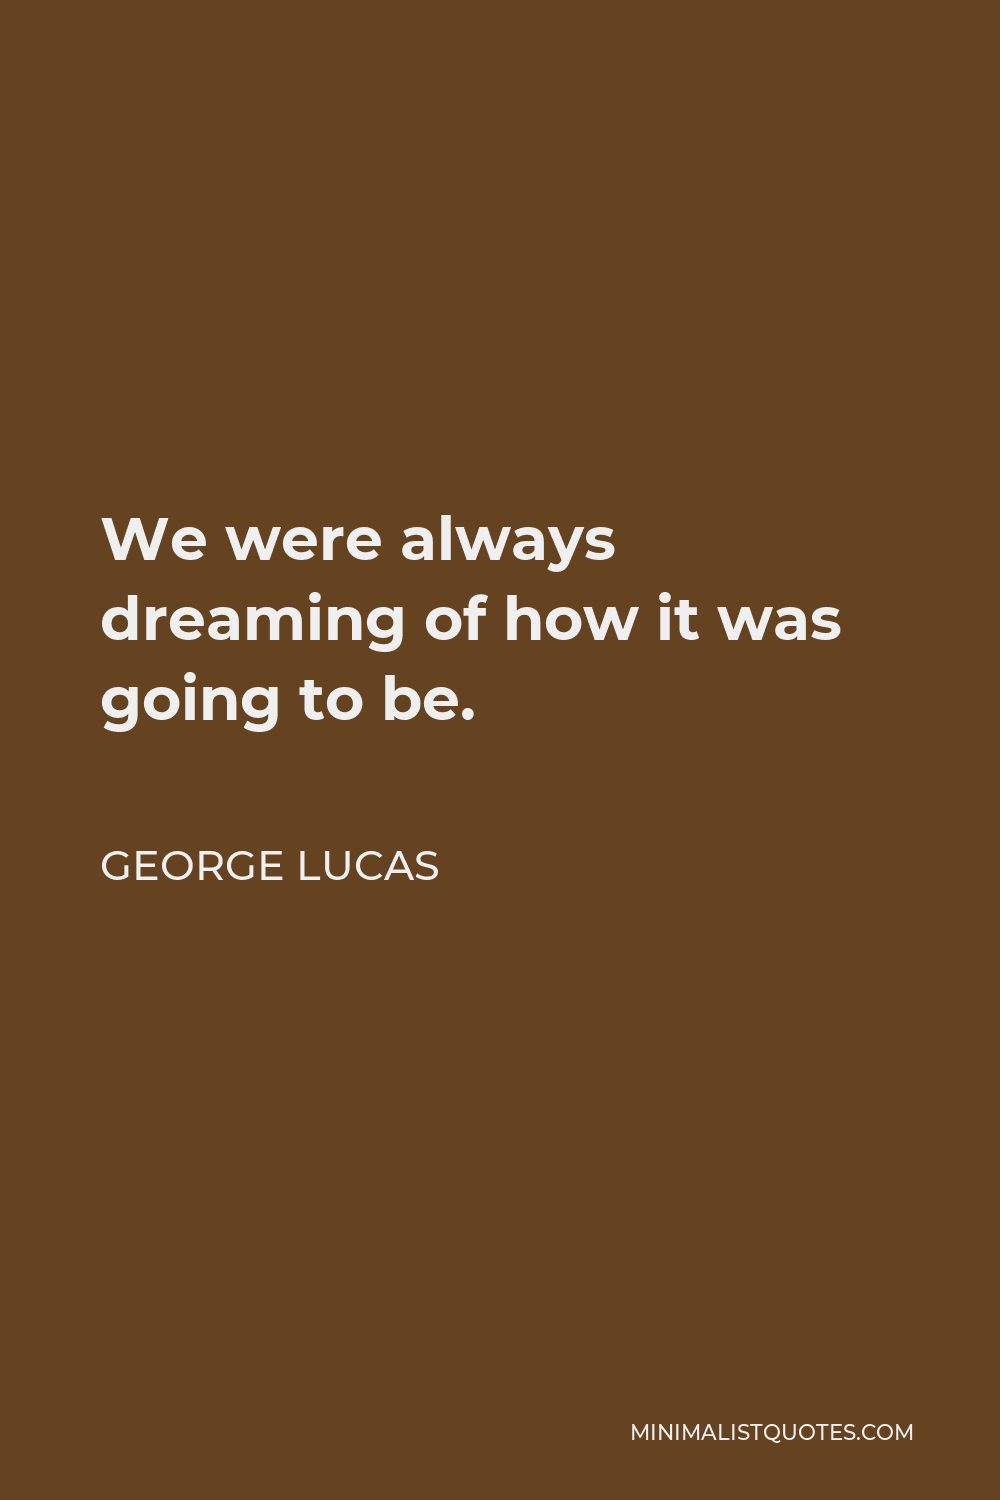 George Lucas Quote - We were always dreaming of how it was going to be.